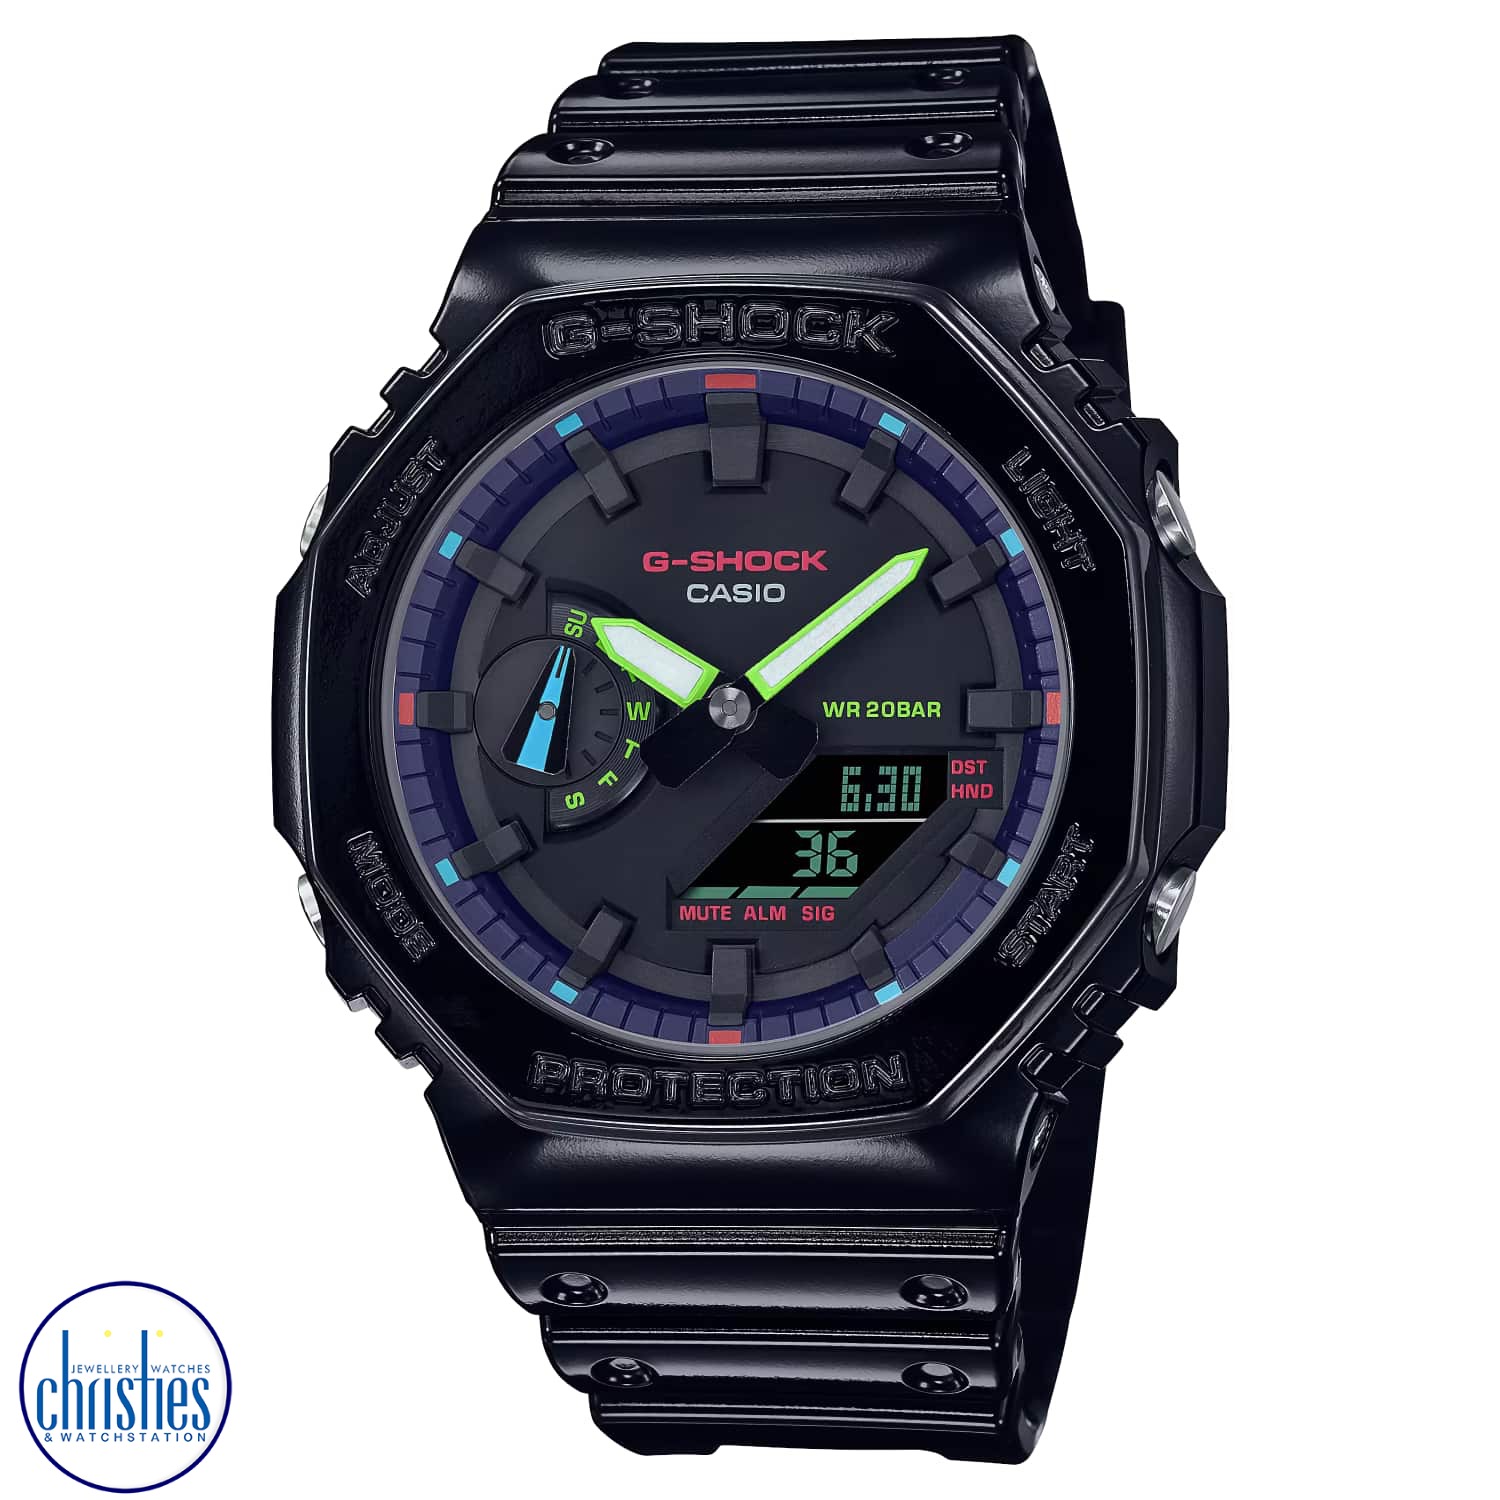 GA2100RGB-1A G-SHOCK Virtual Rainbow Series Watch. Introducing the G-Shock Virtual Rainbow Series Watches - a stunning fusion of cyber tech game-world aesthetic and G-SHOCK's signature toughness.